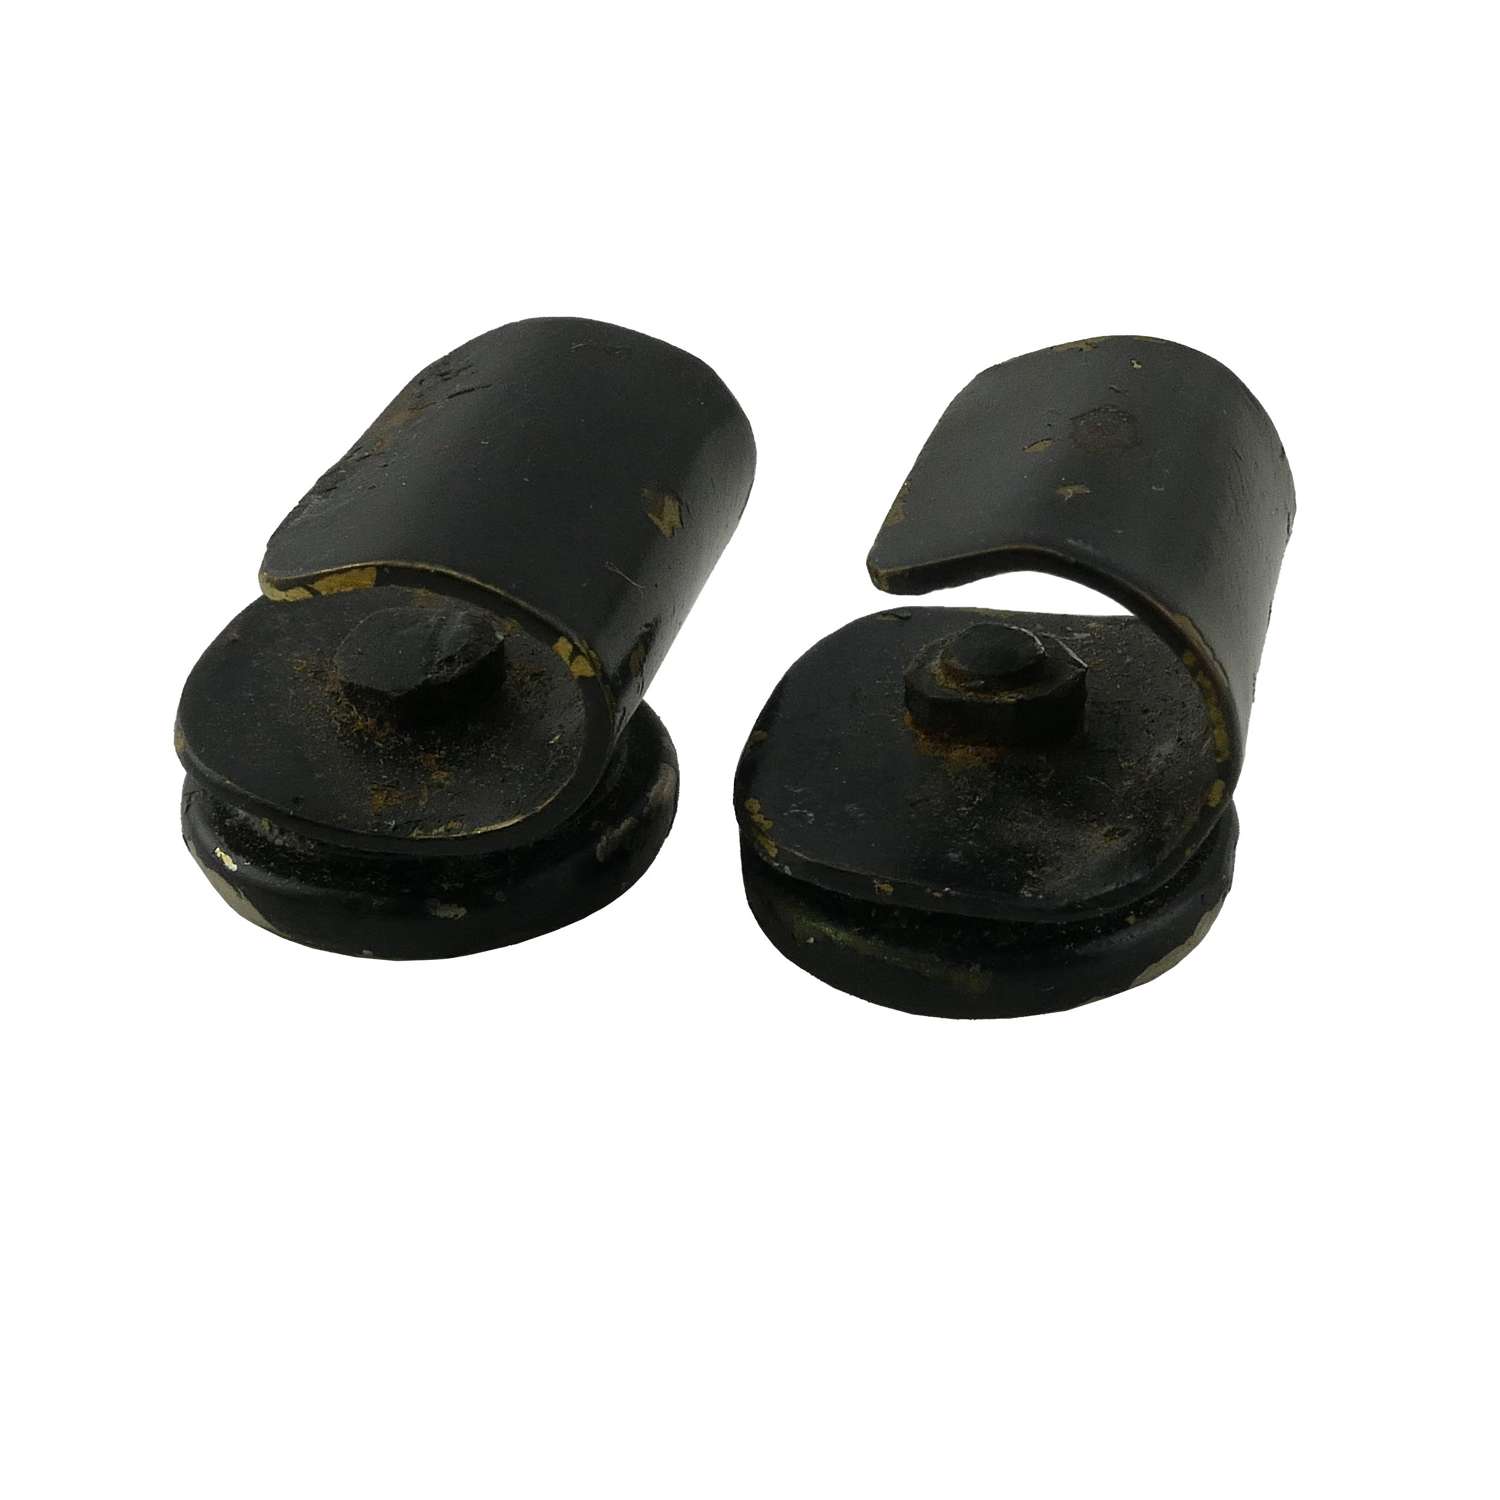 RAF MK.IV series goggle strap retainers